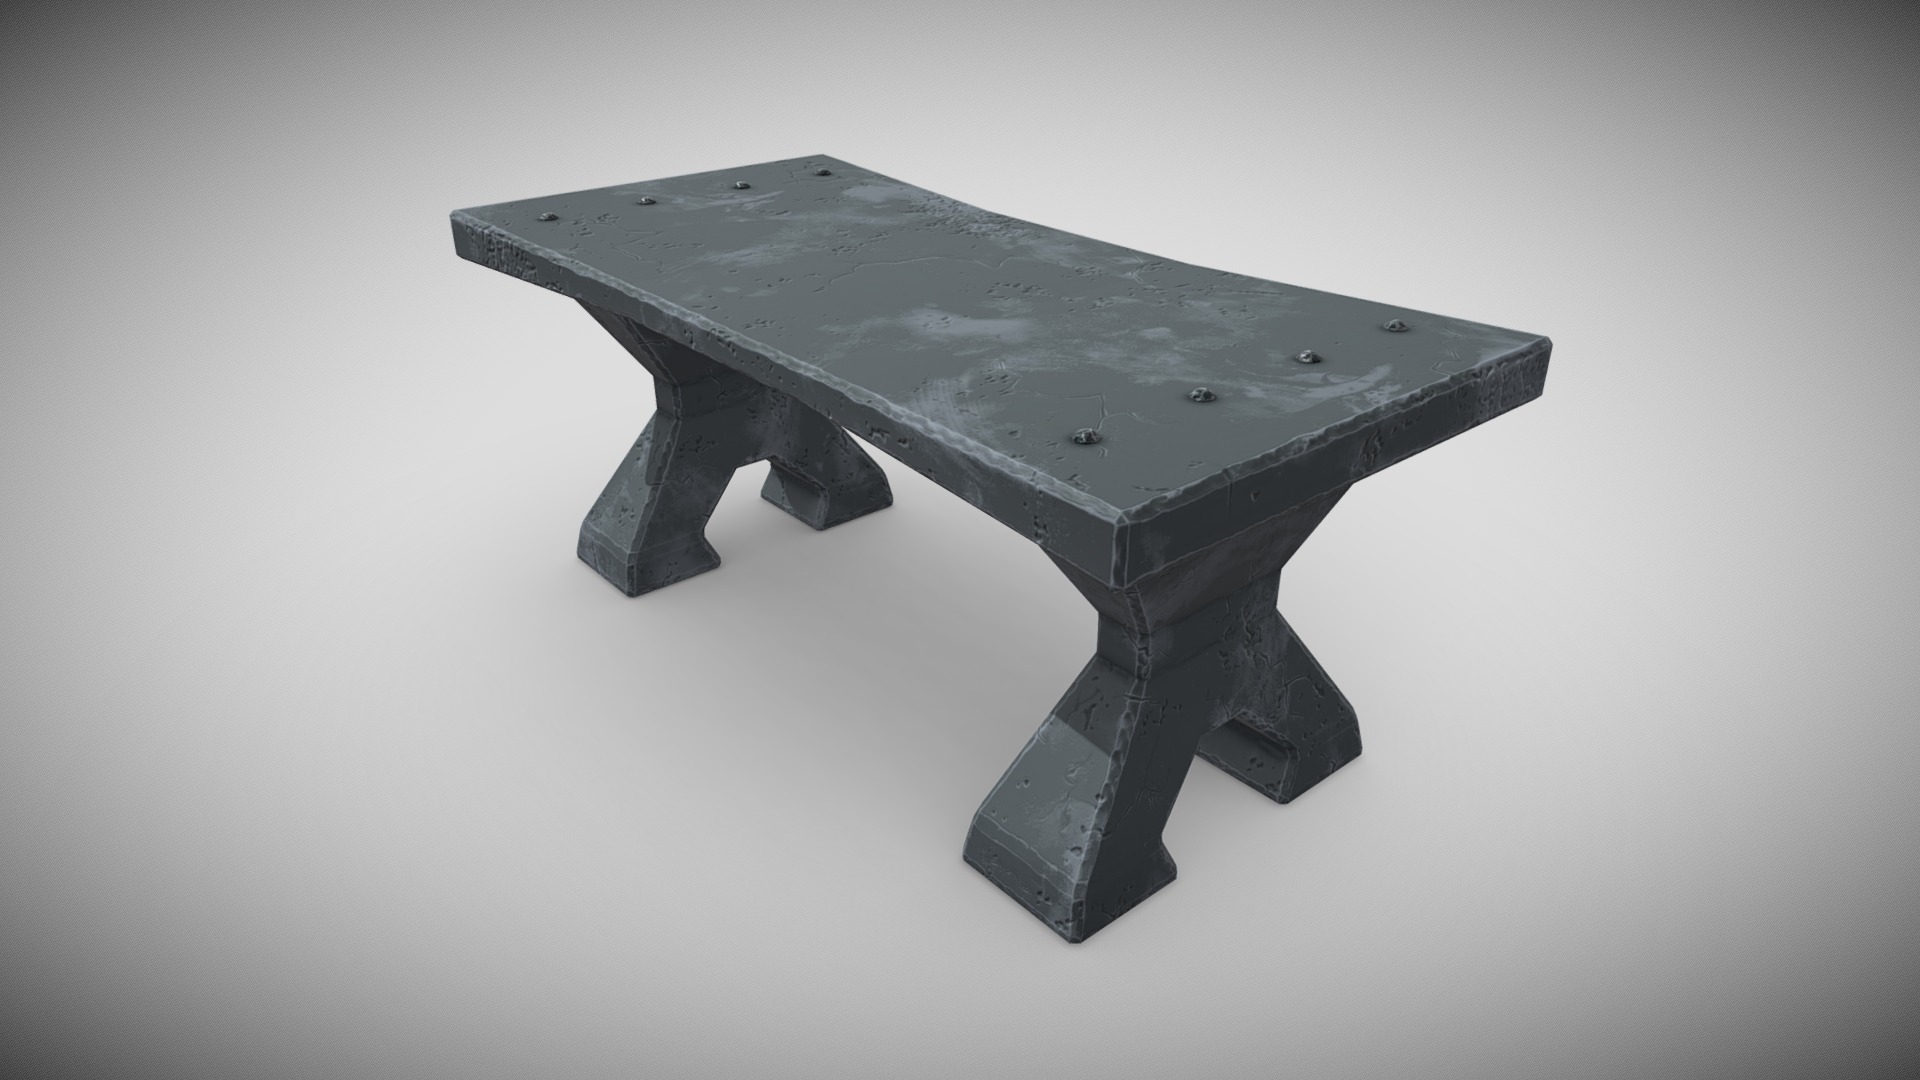 3D model Stylized Concrete Table - This is a 3D model of the Stylized Concrete Table. The 3D model is about a black and grey toy gun.